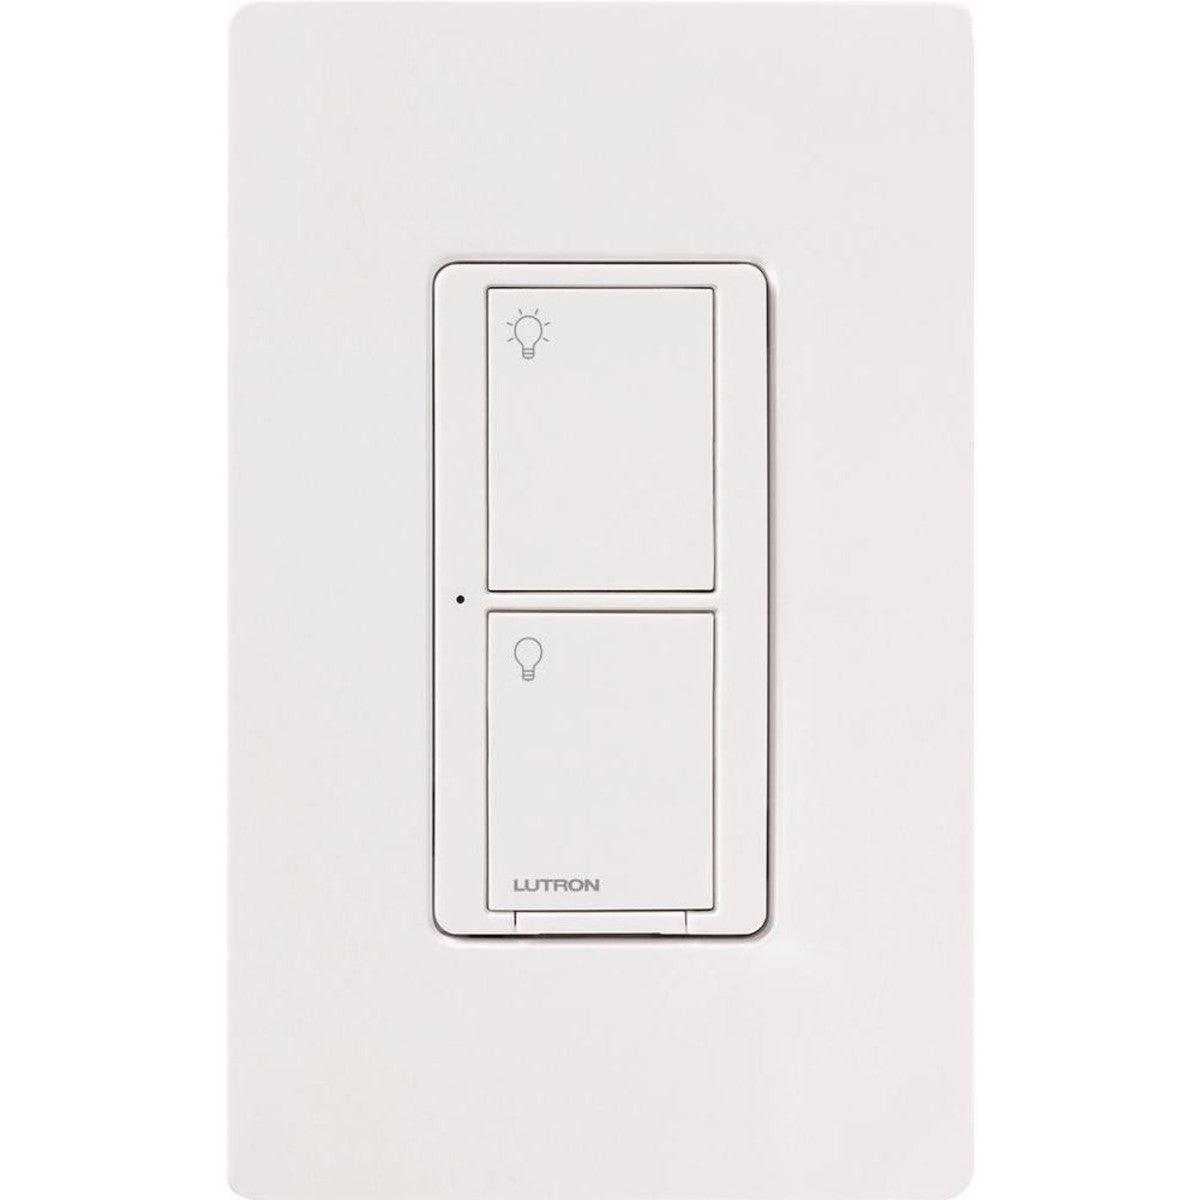 smart light switches